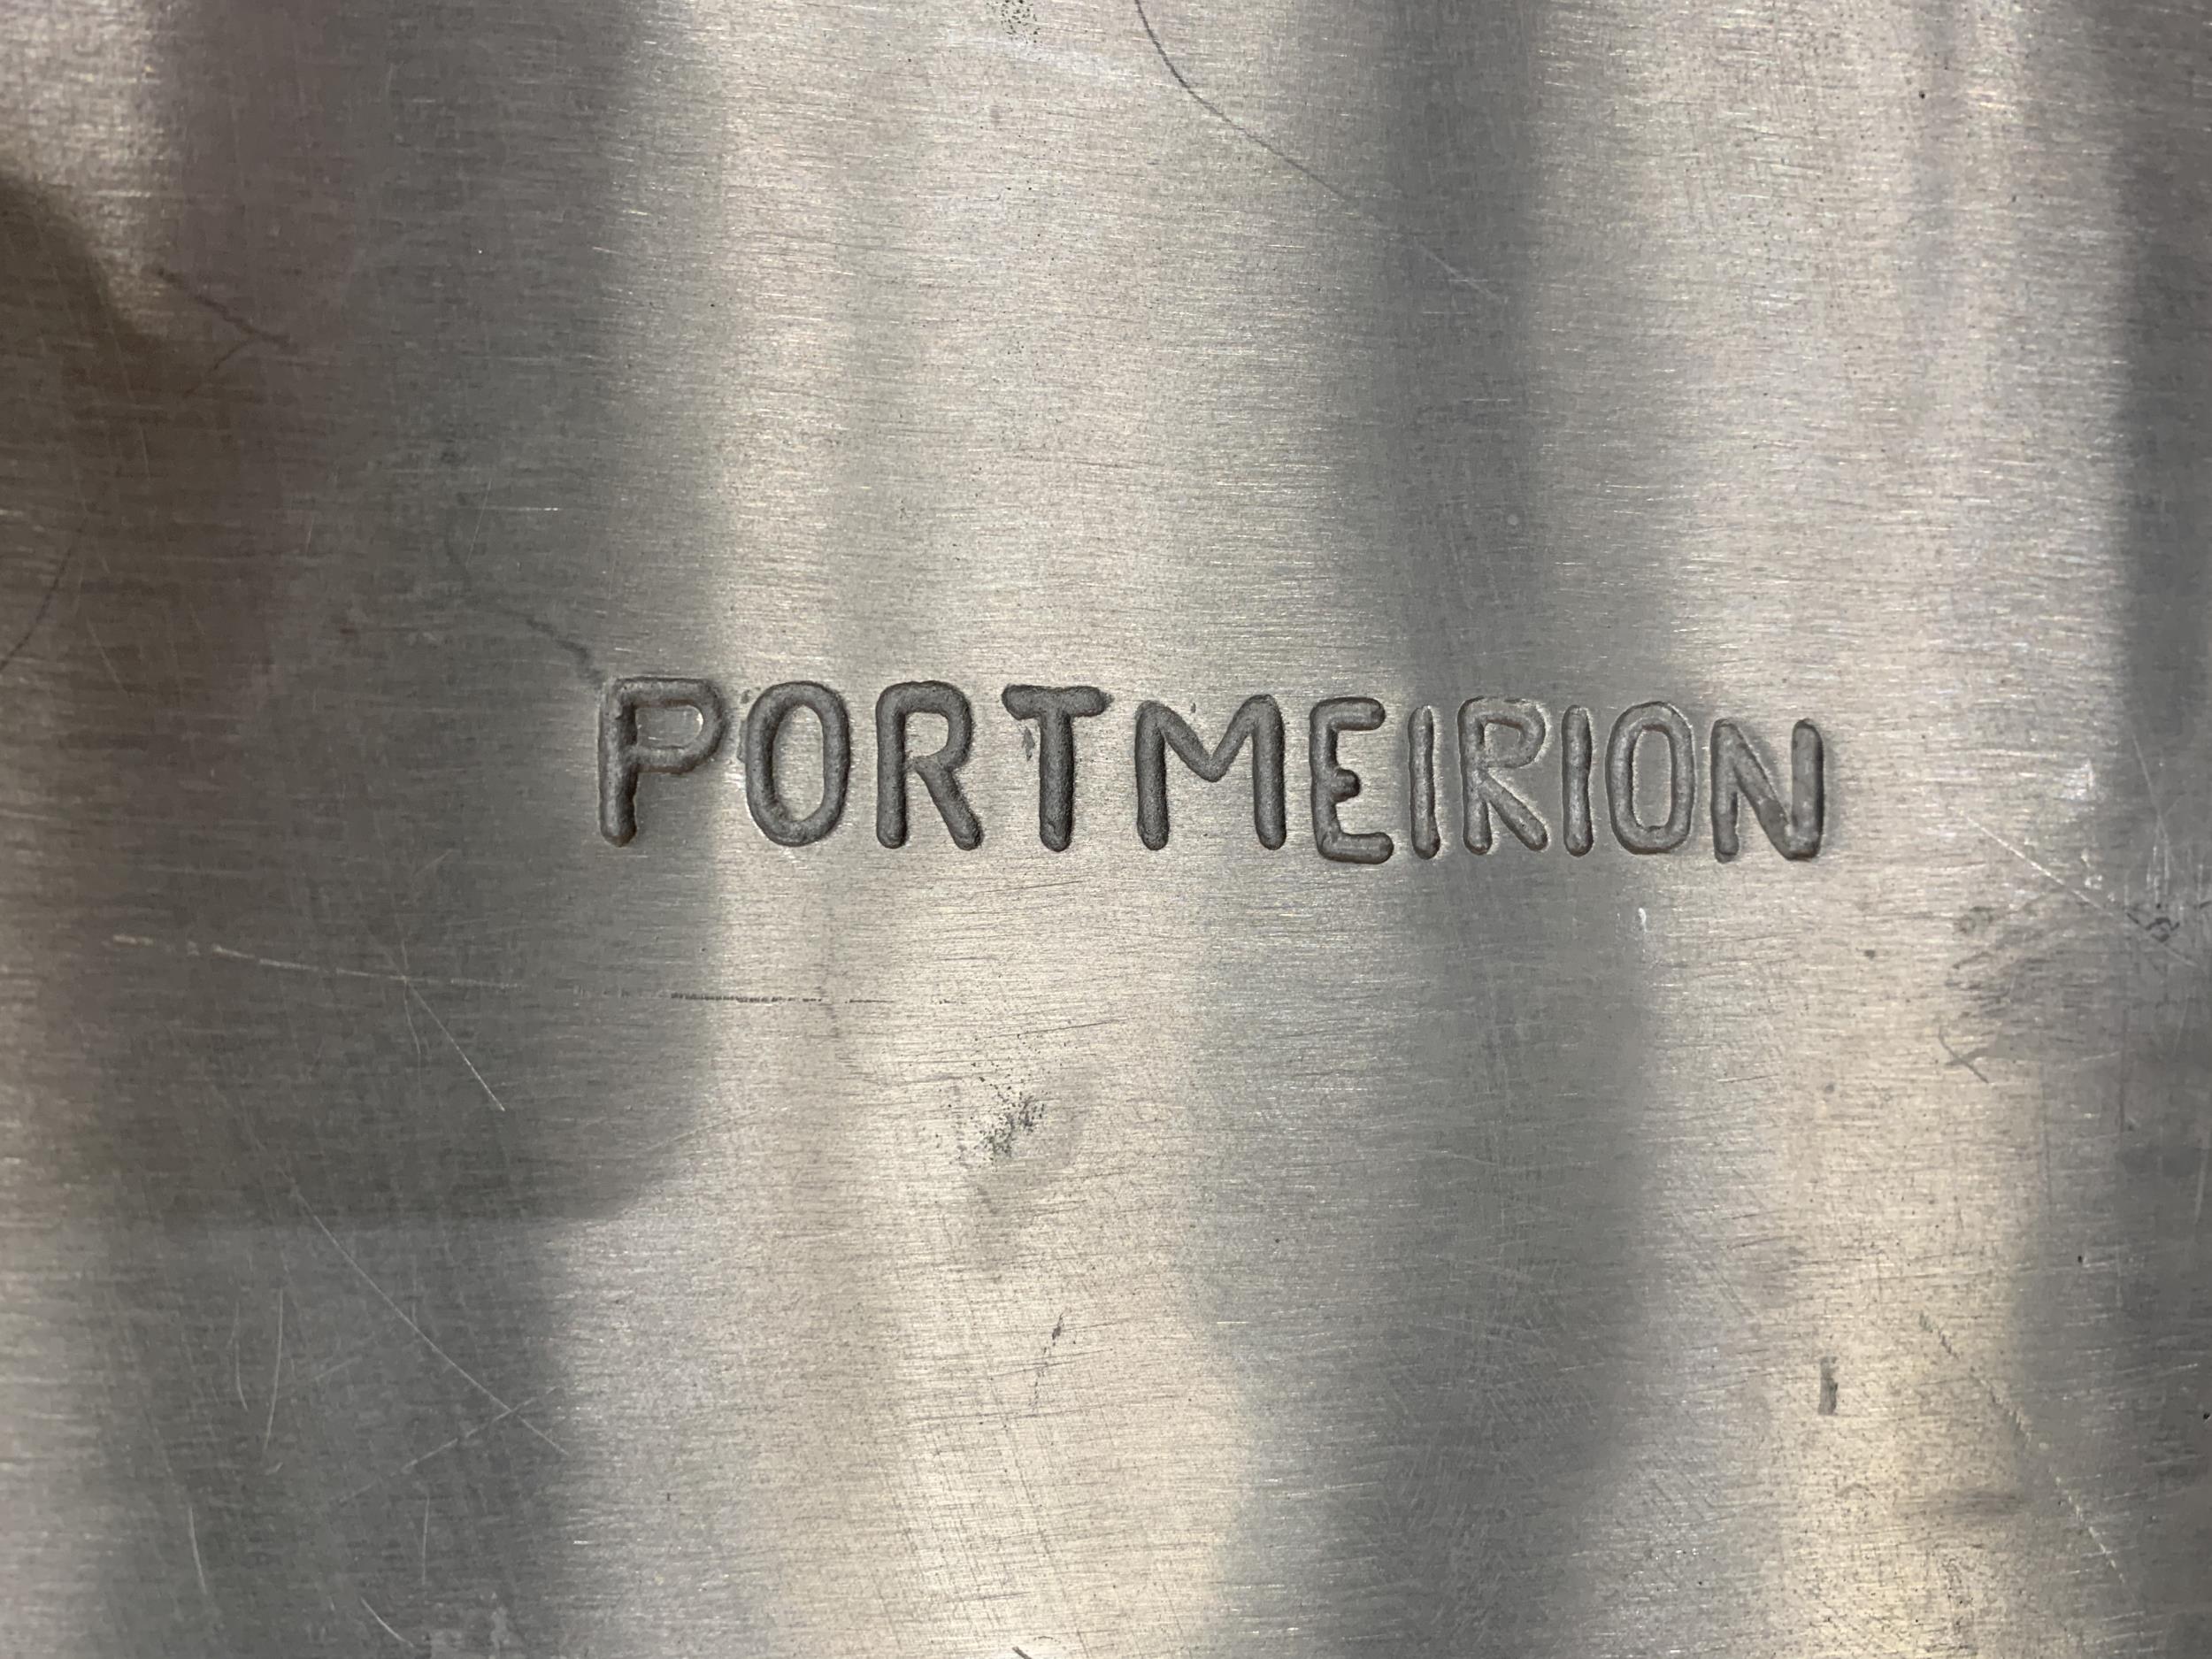 A LARGE CHROMED HEAVY ALUMINIUM CONCAVE TRAY BY PORTMERION - 14 X 14 INCH - Image 3 of 3